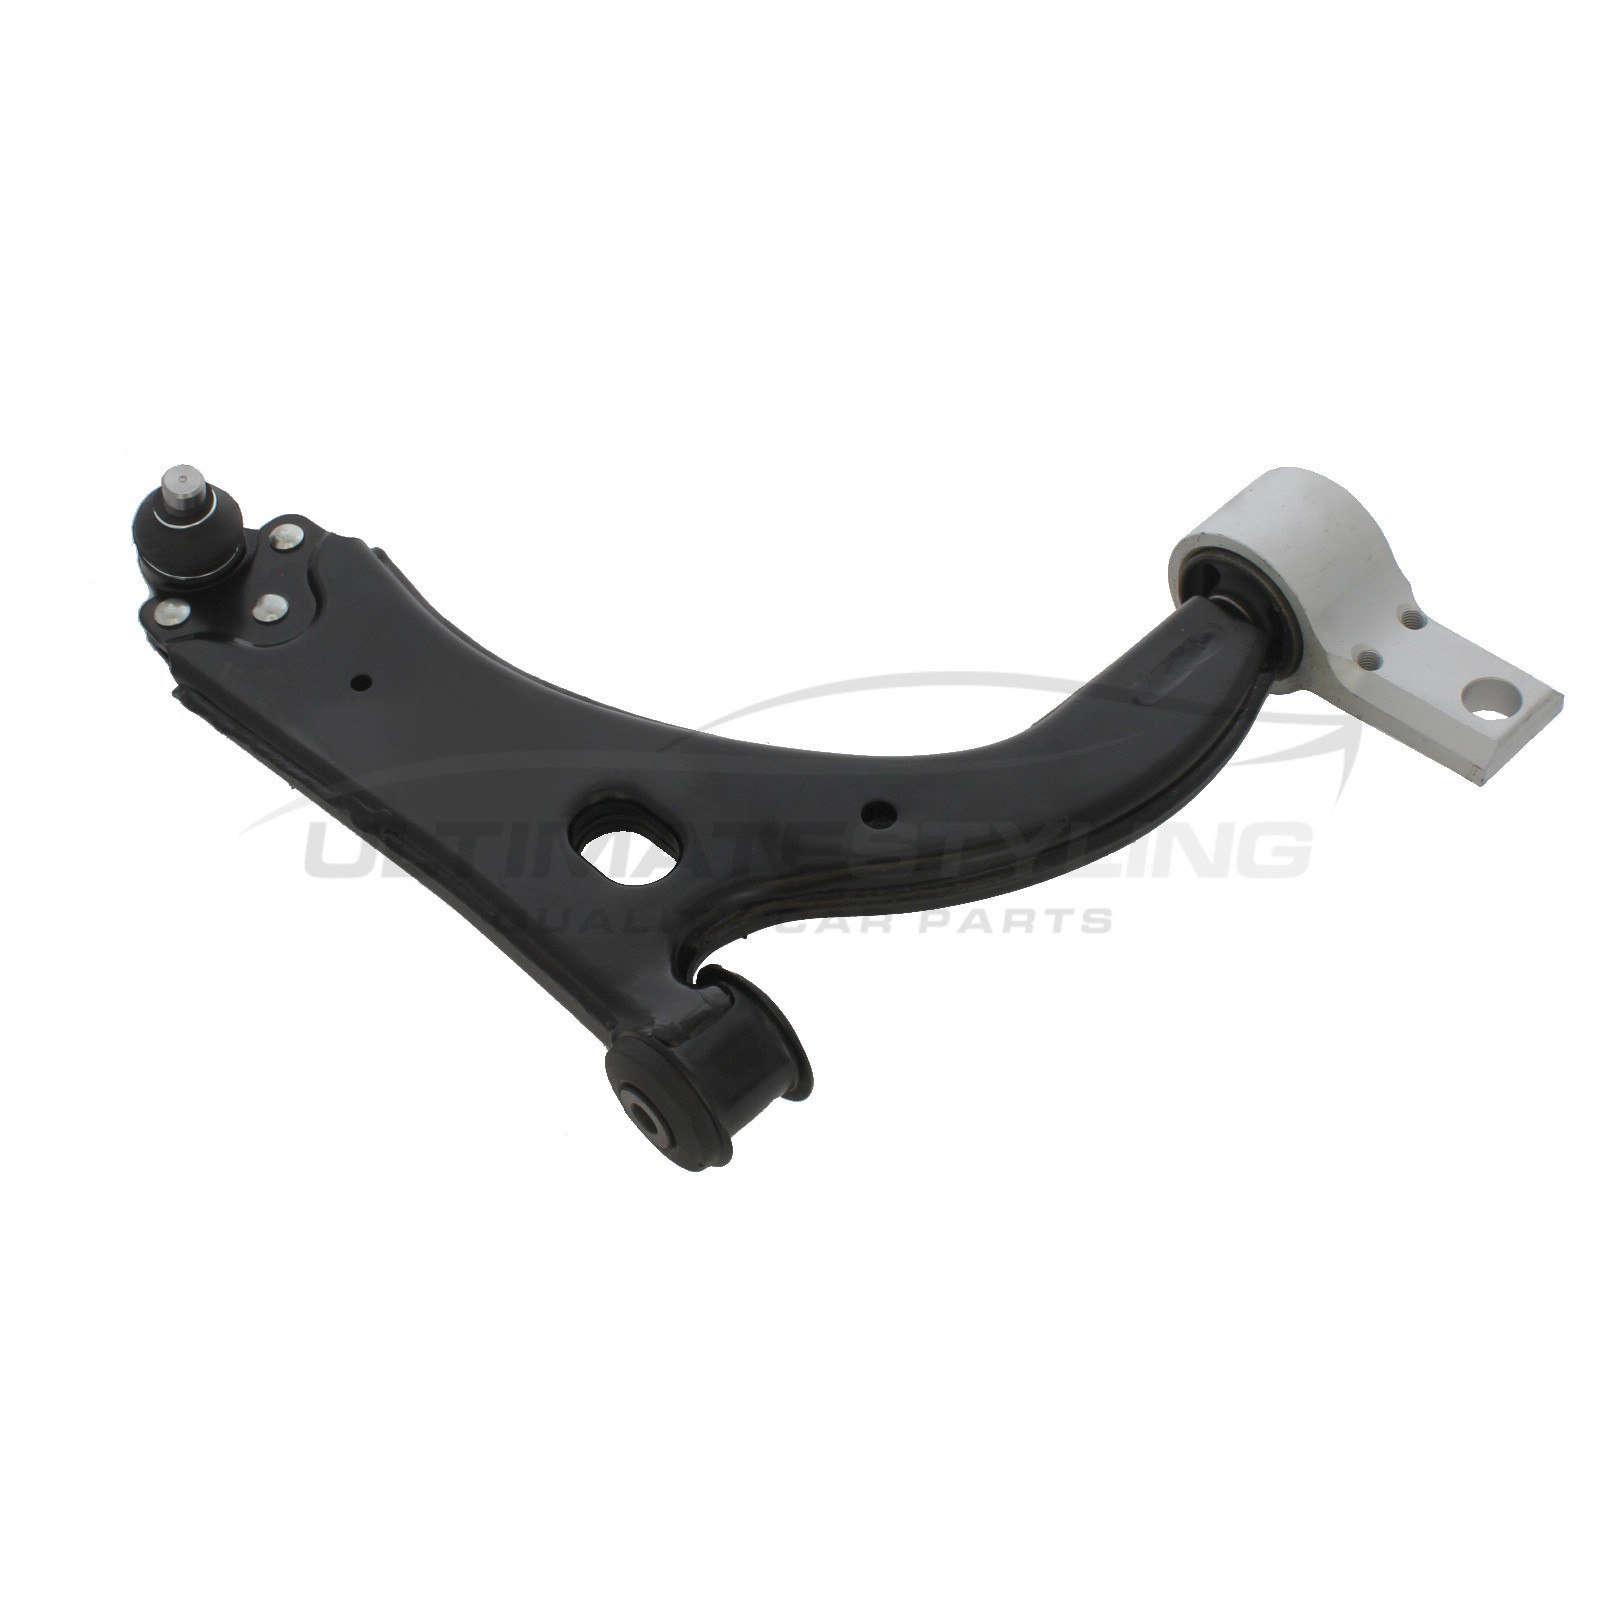 Suspension Arm for Ford Fiesta